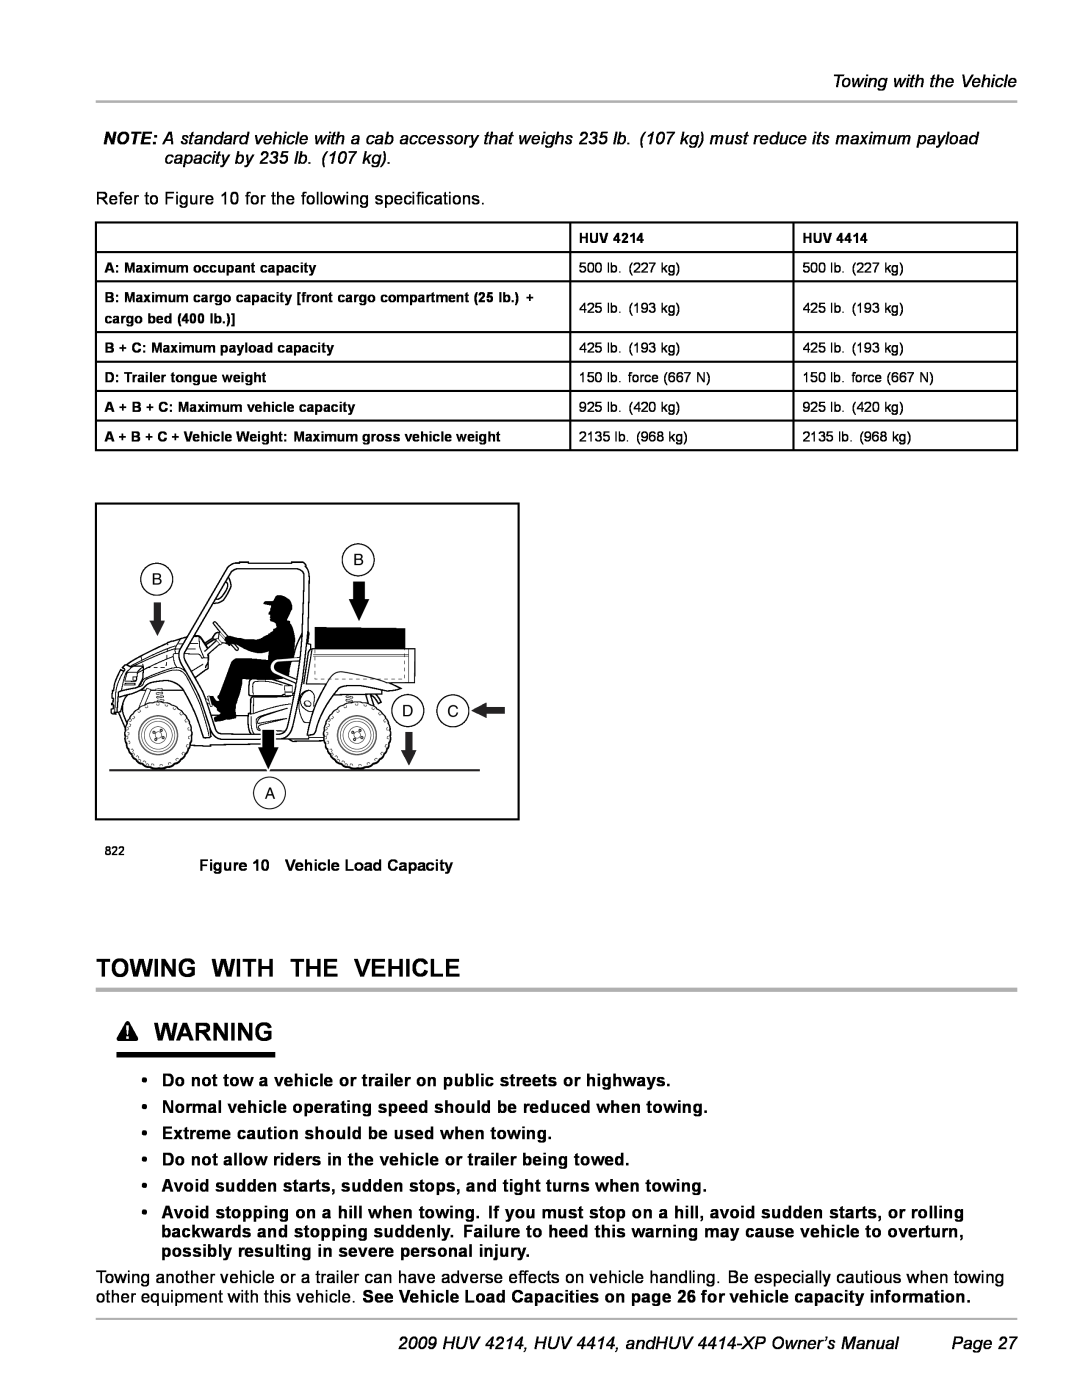 Husqvarna Towing With The Vehicle, Towing with the Vehicle, HUV 4214, HUV 4414, andHUV 4414-XP Owner’s Manual, Page 